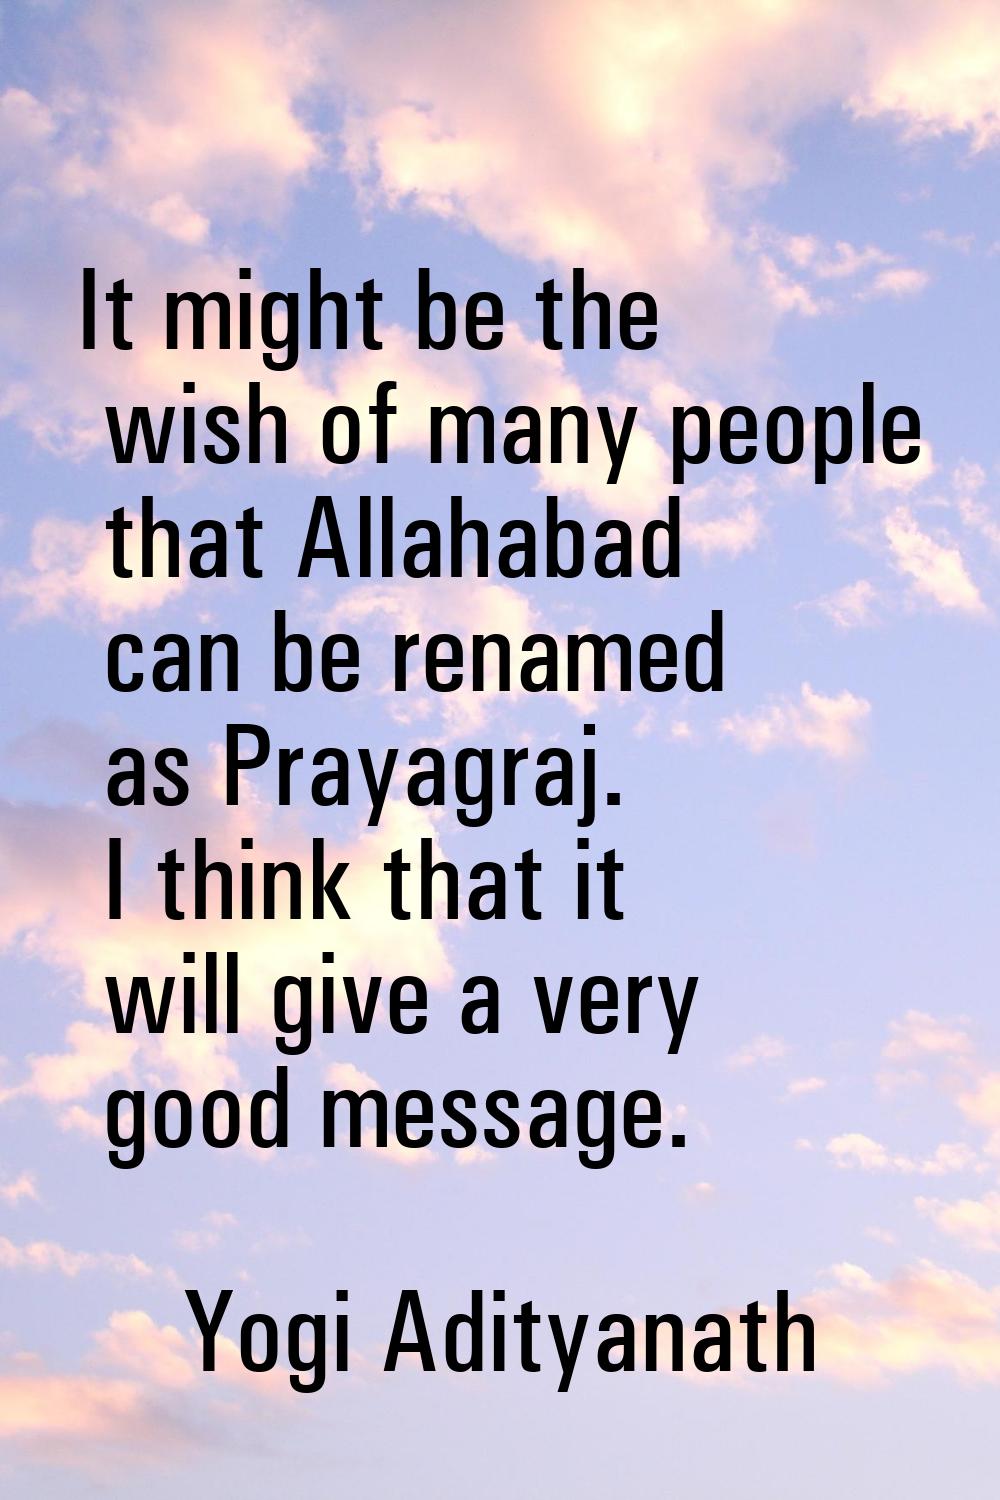 It might be the wish of many people that Allahabad can be renamed as Prayagraj. I think that it wil